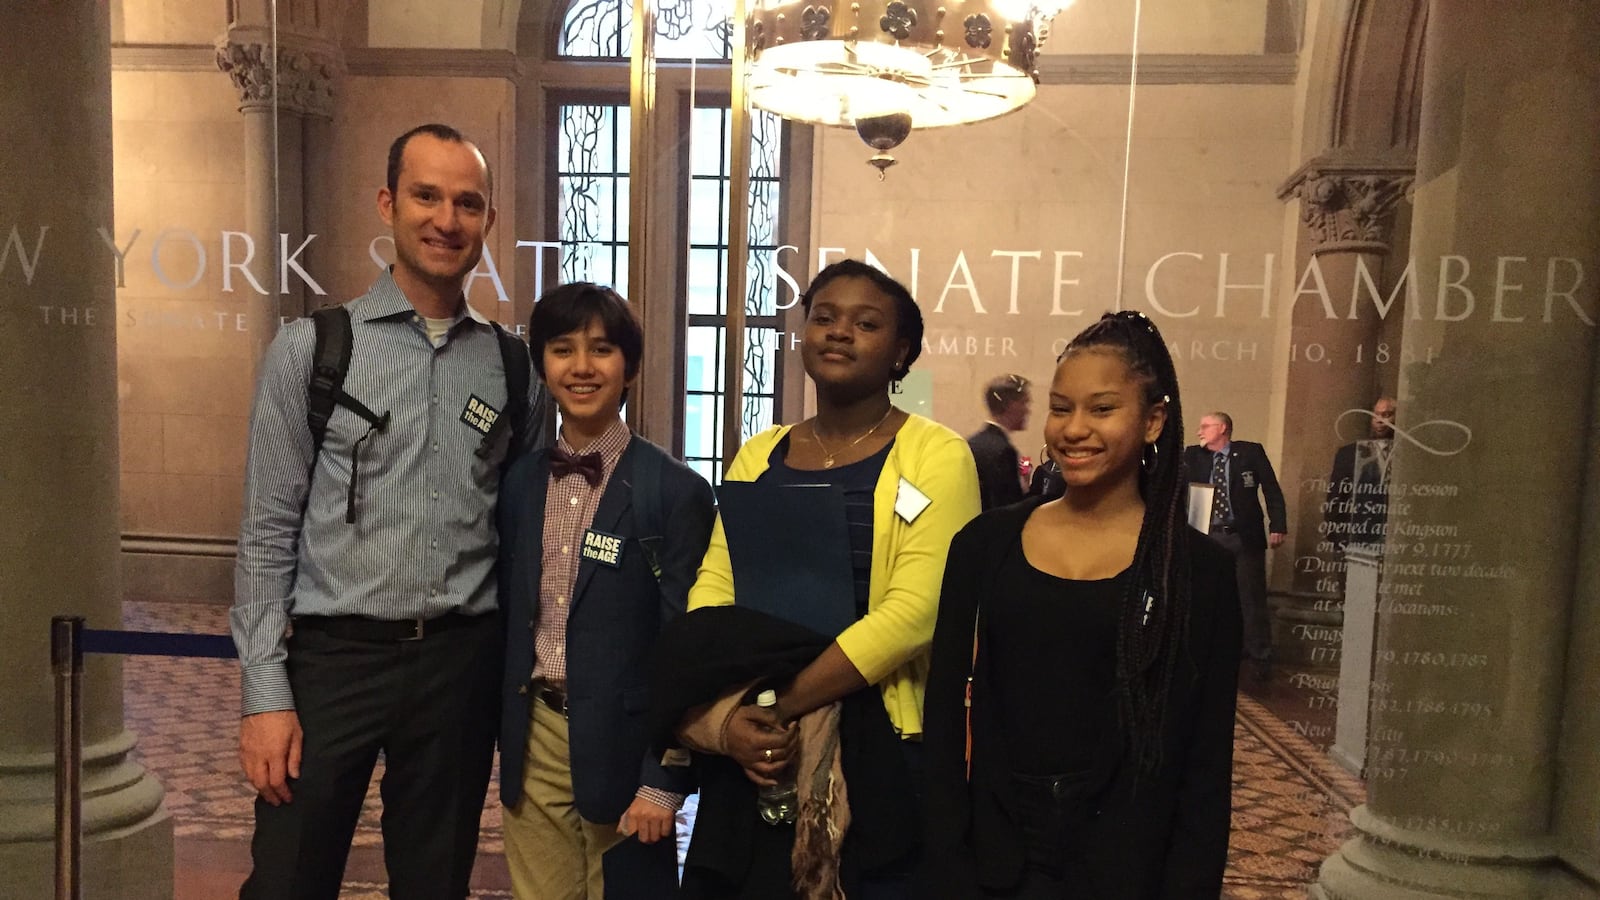 Assistant Principal Benjamin Geballe (left) poses outside the New York Senate chamber with students Dash Avincula (center left), Alex Bristol (center right) and Kayla Mowatt (right).